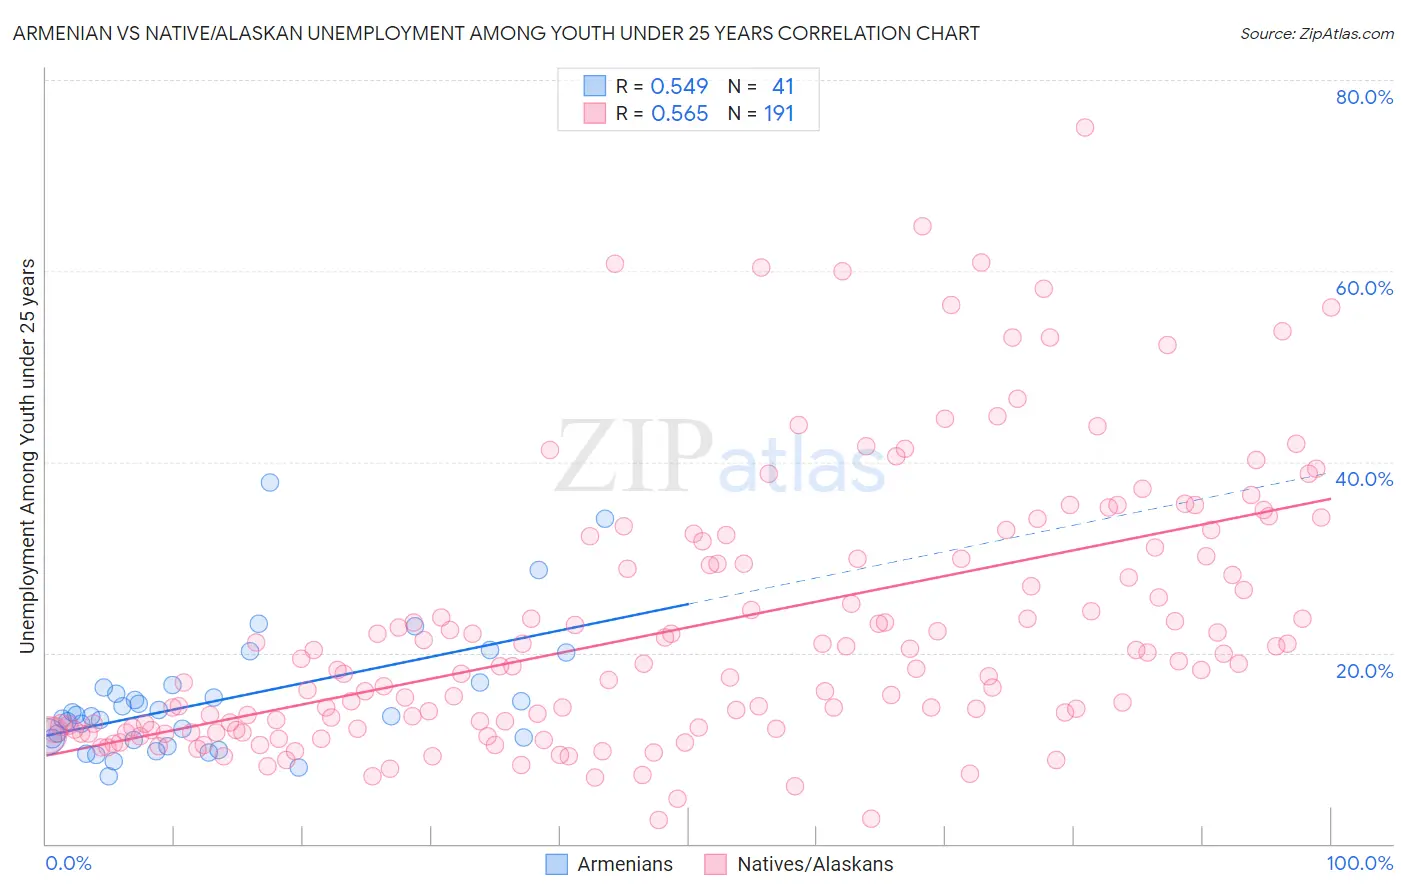 Armenian vs Native/Alaskan Unemployment Among Youth under 25 years